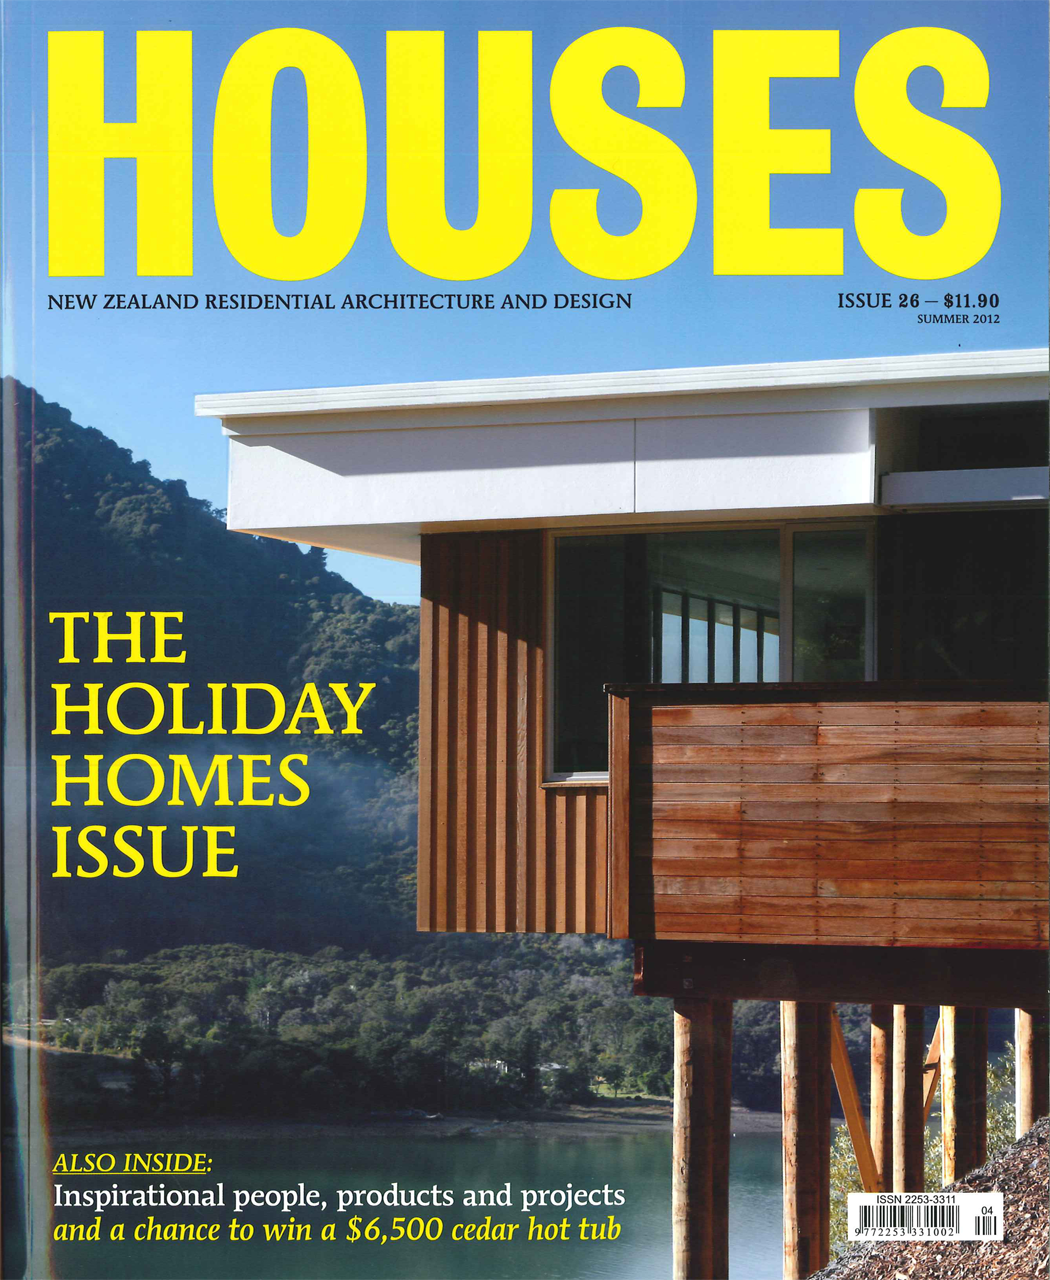 Houses - Issue 26 2012 (p32)-1.png